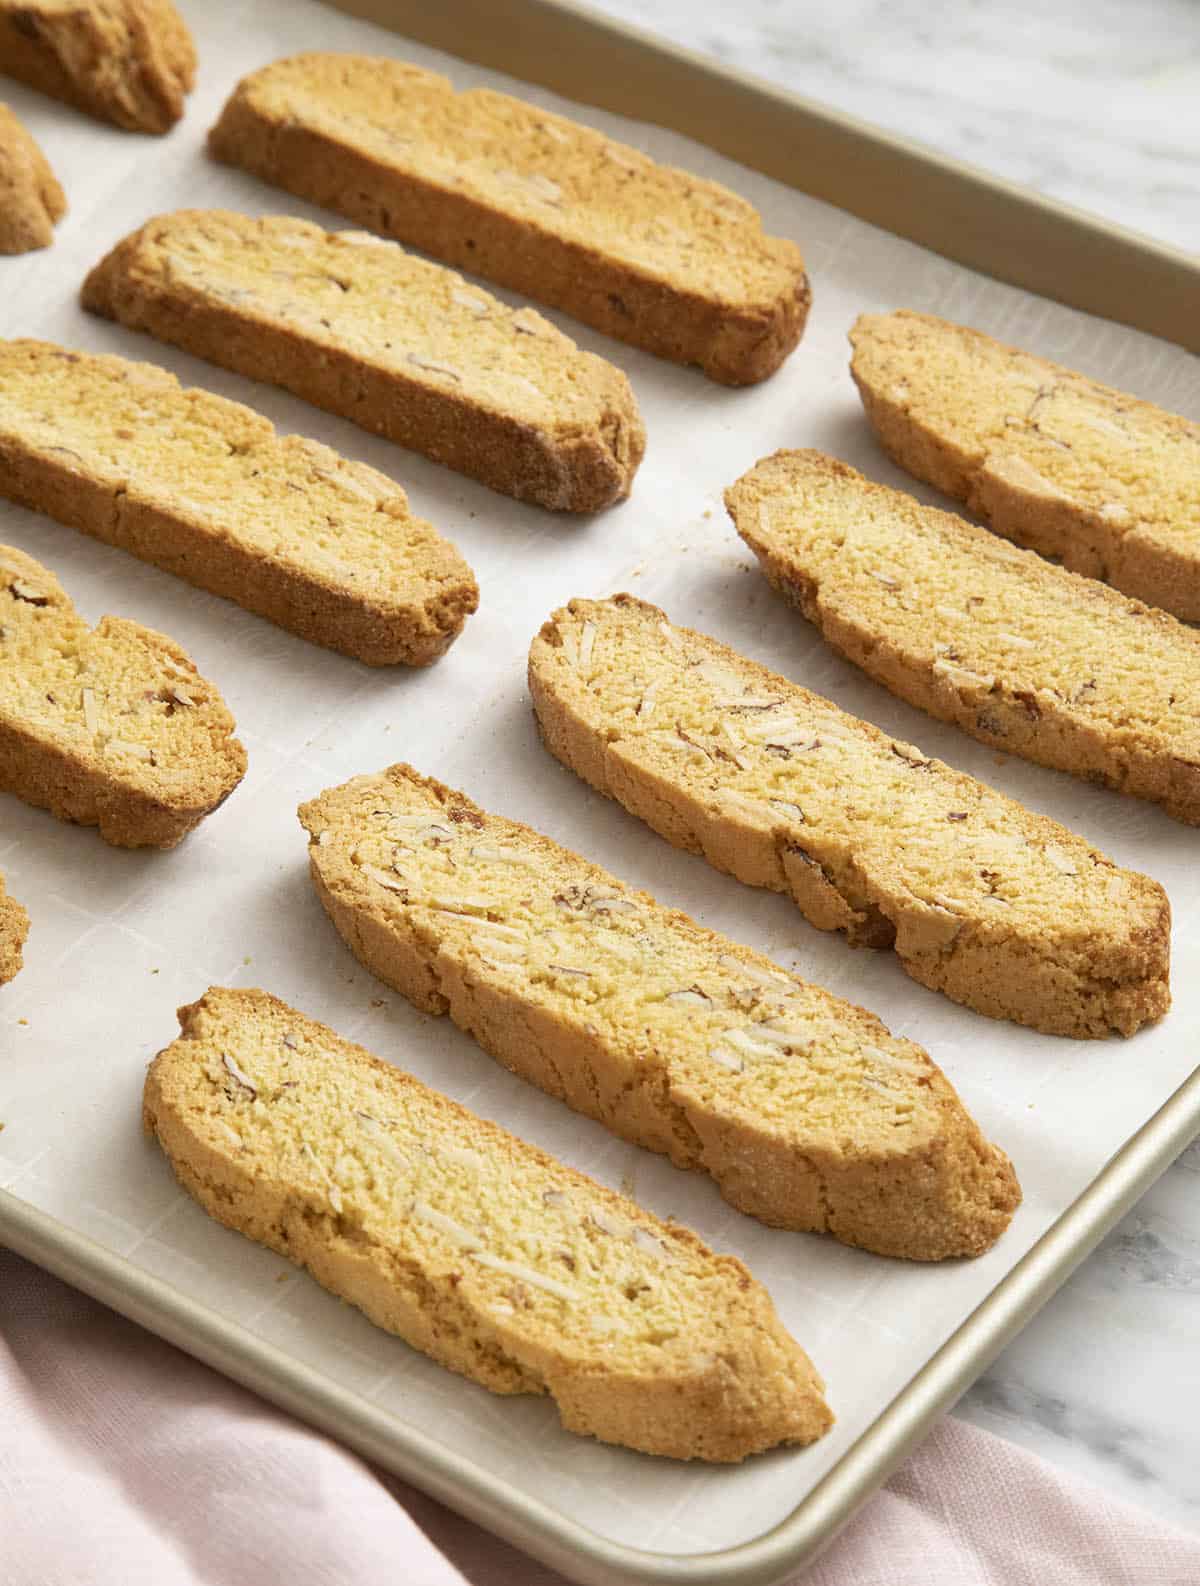 Biscotti cooling on a baking sheet.